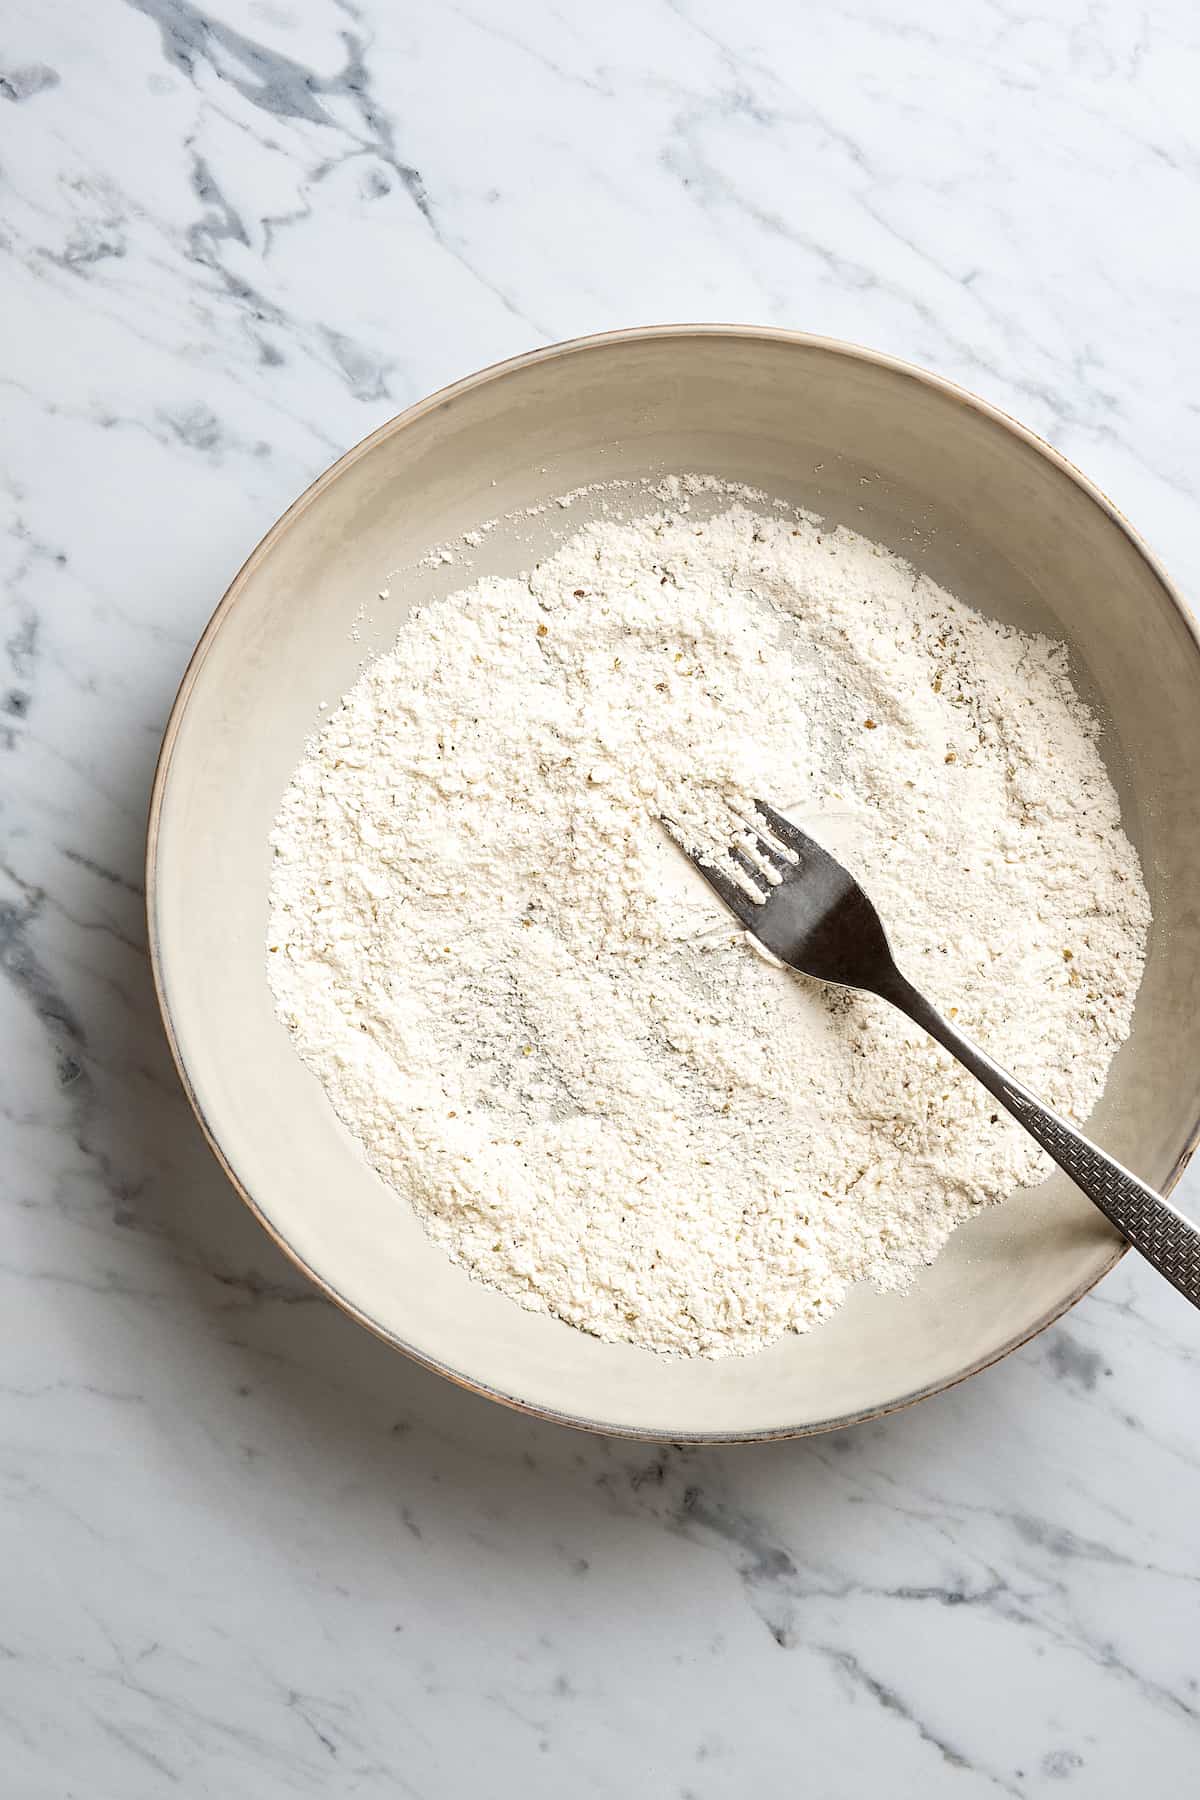 Flour and seasonings combined with a fork in a mixing bowl.